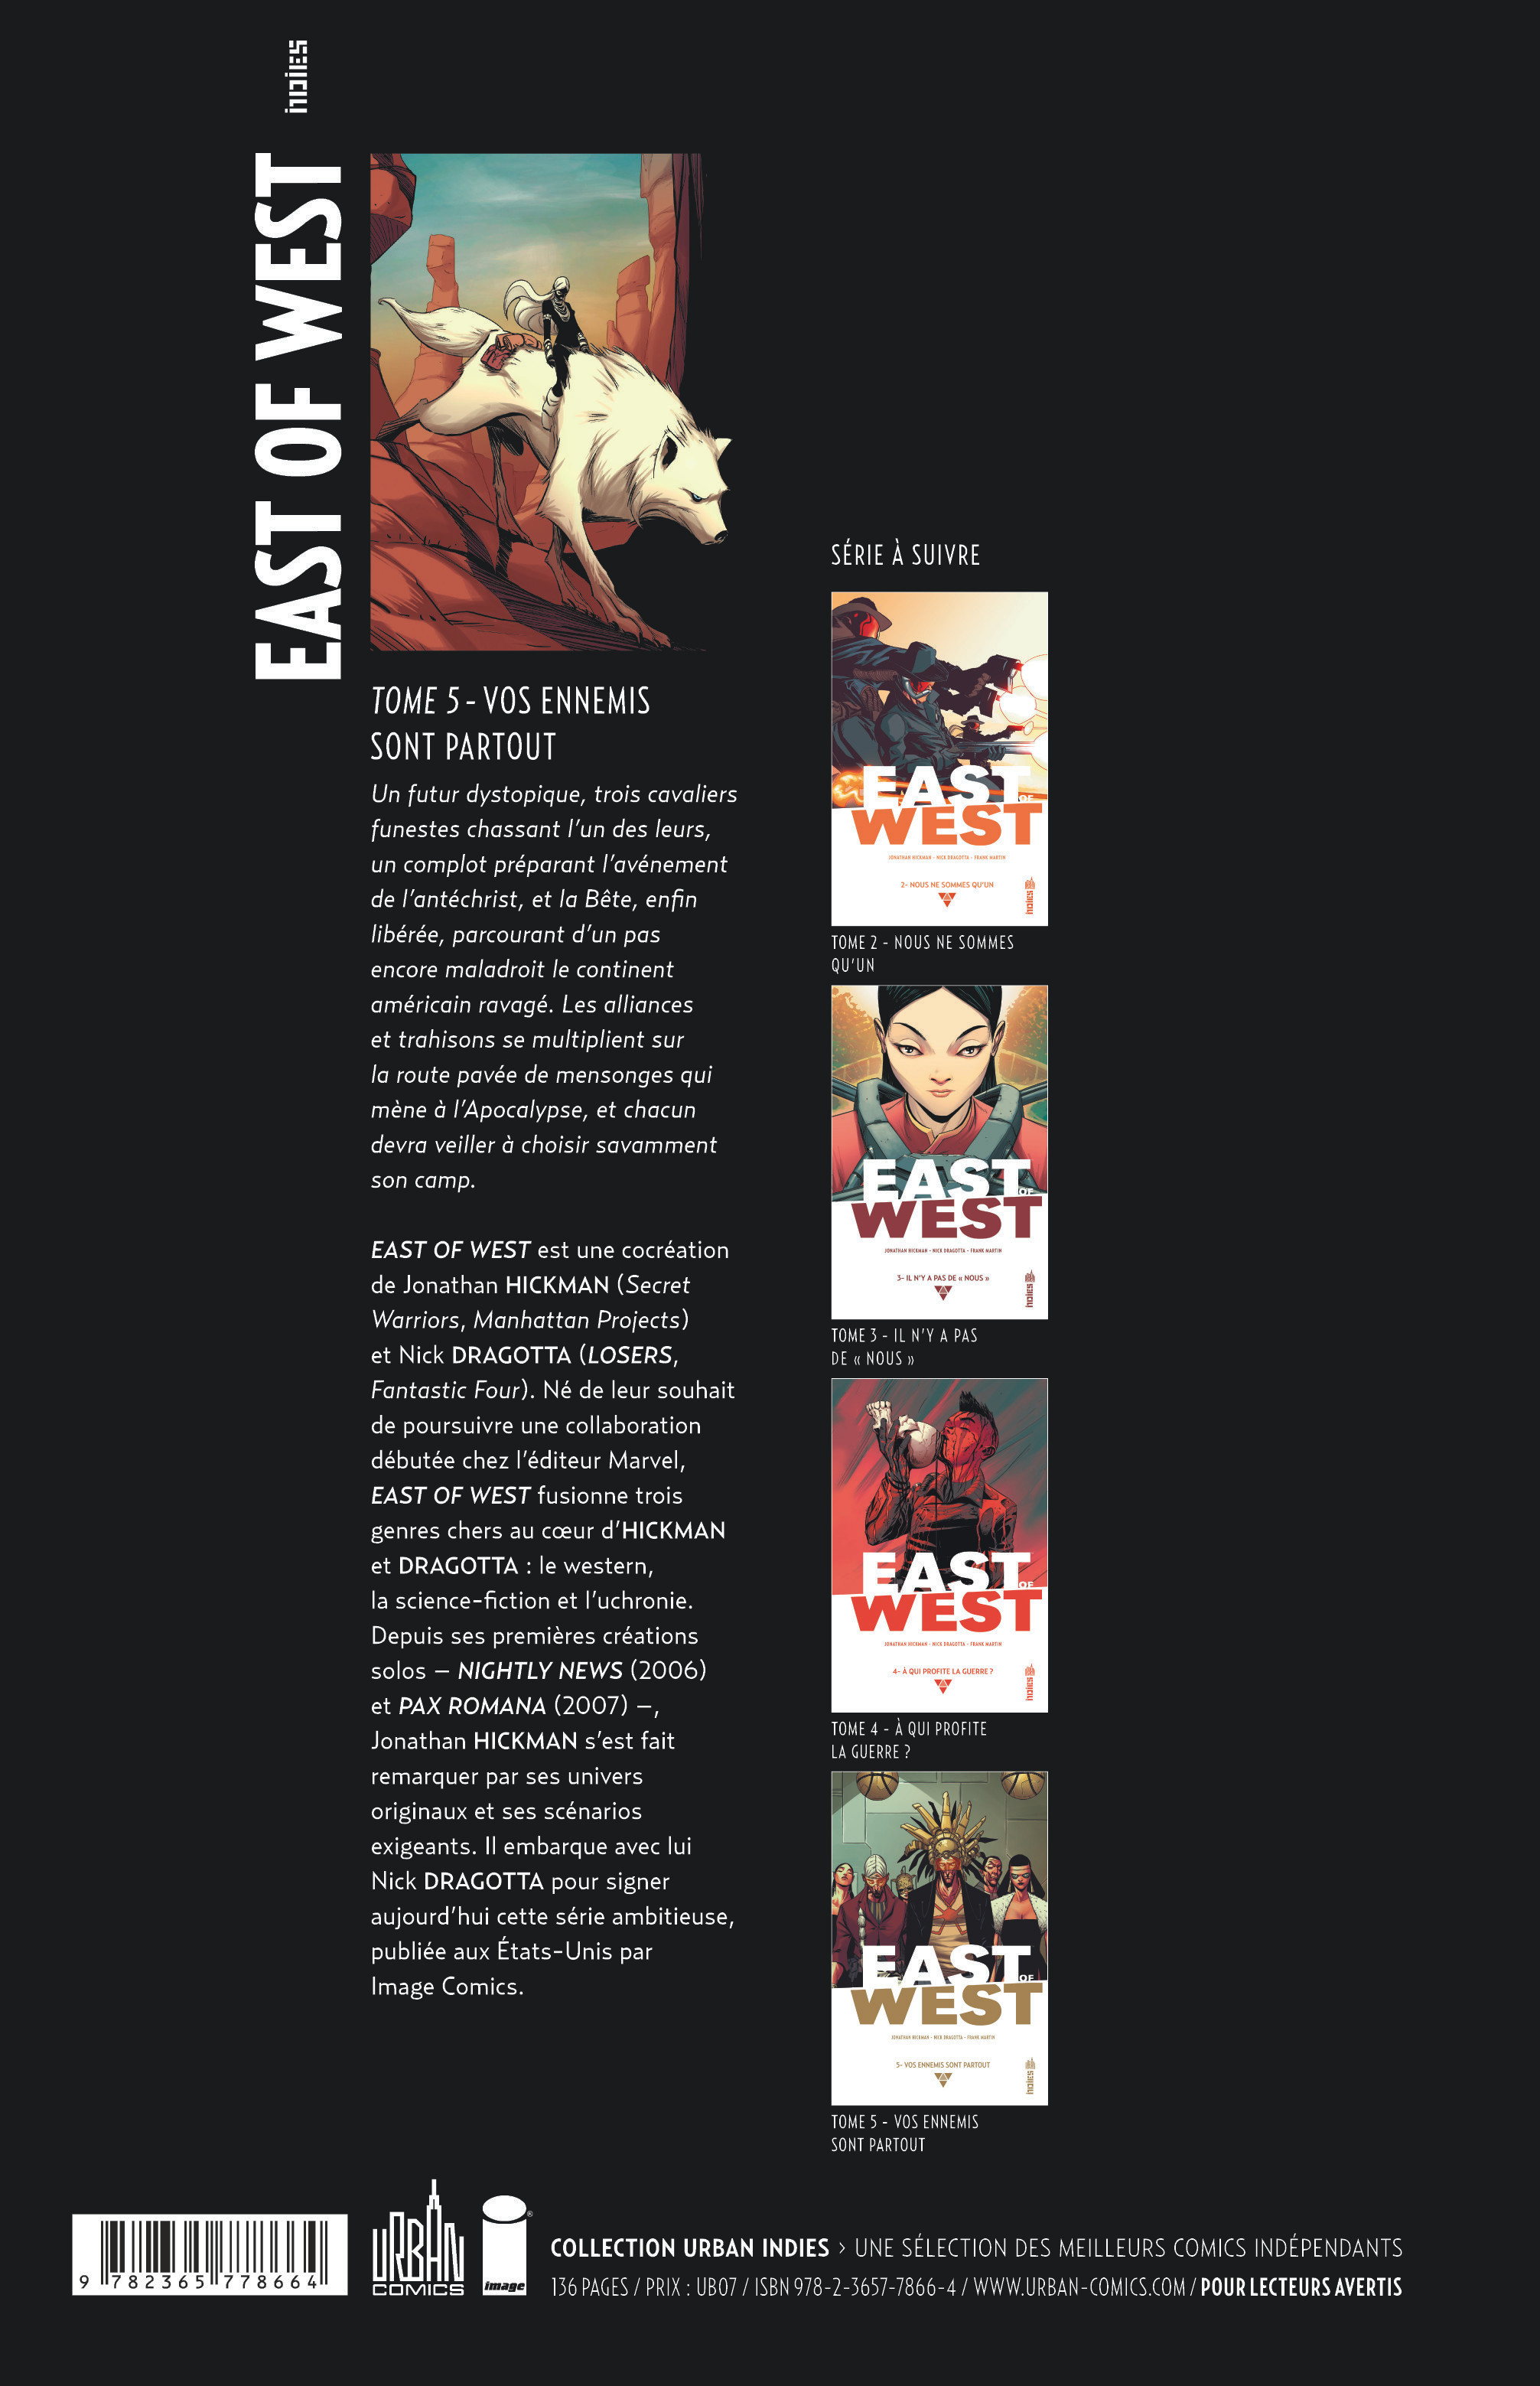 East of West – Tome 5 - 4eme